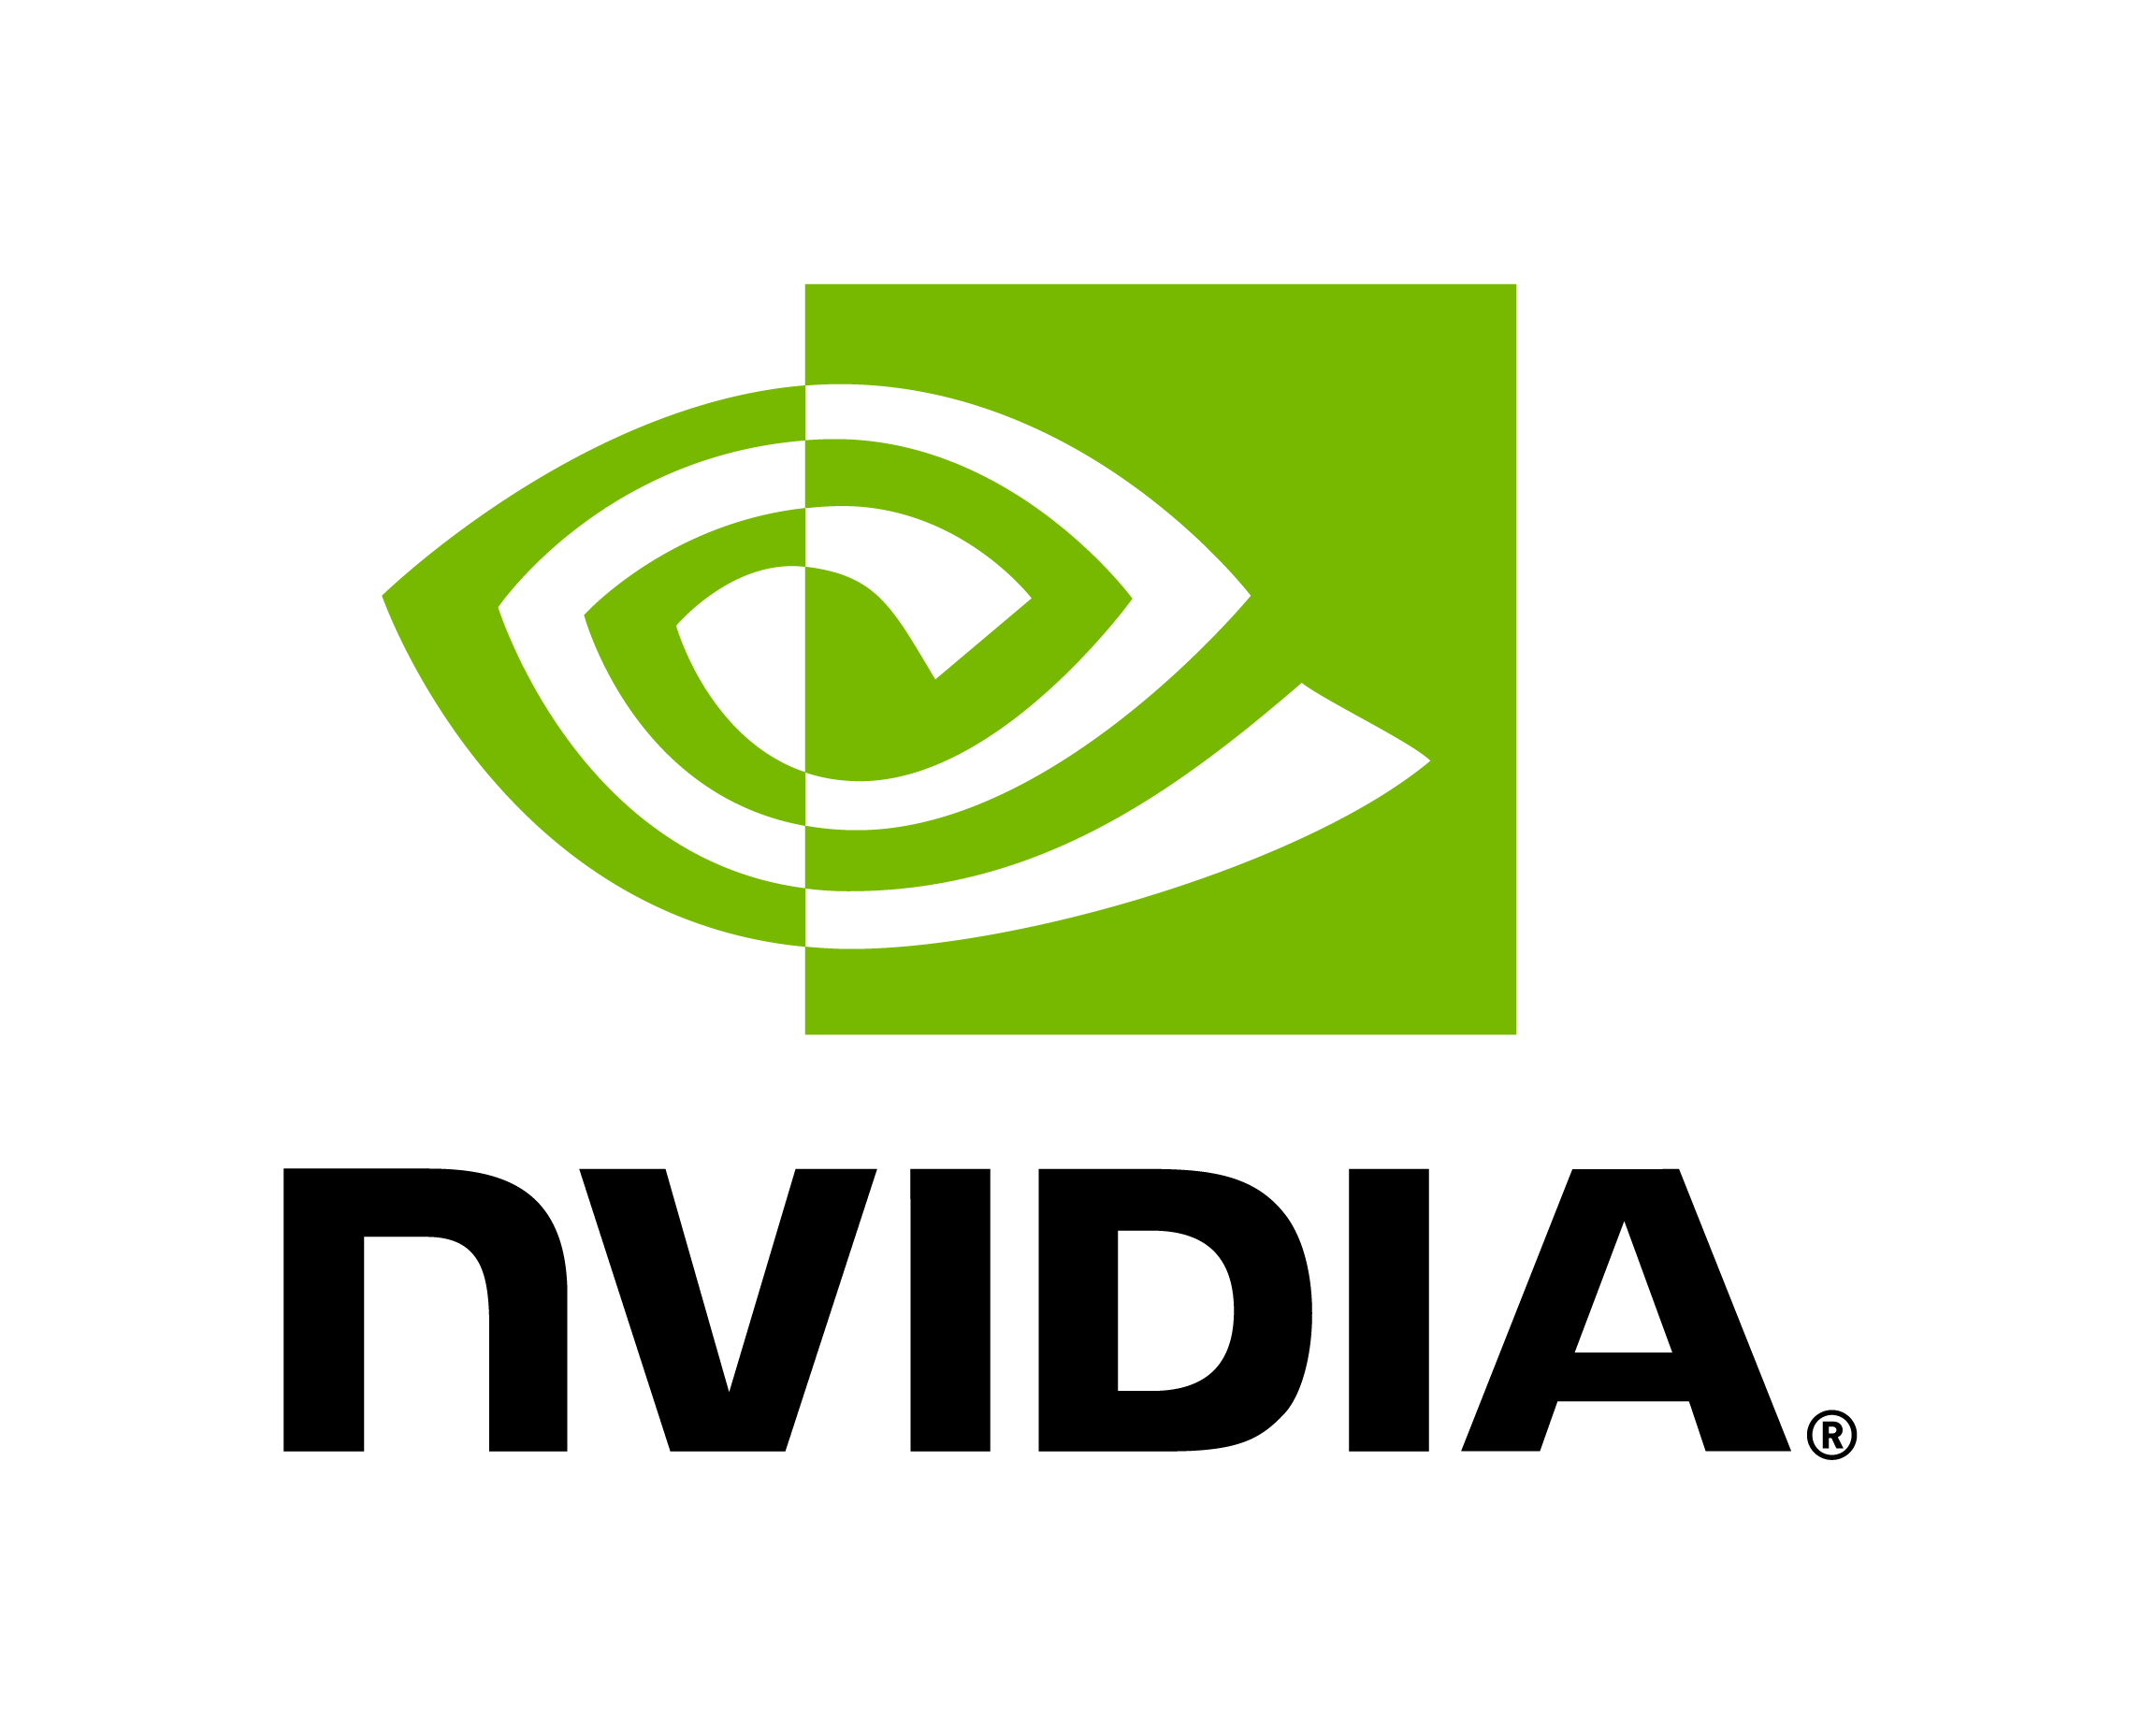 _images/nvidia-logo-vert-rgb-blk-for-screen.png